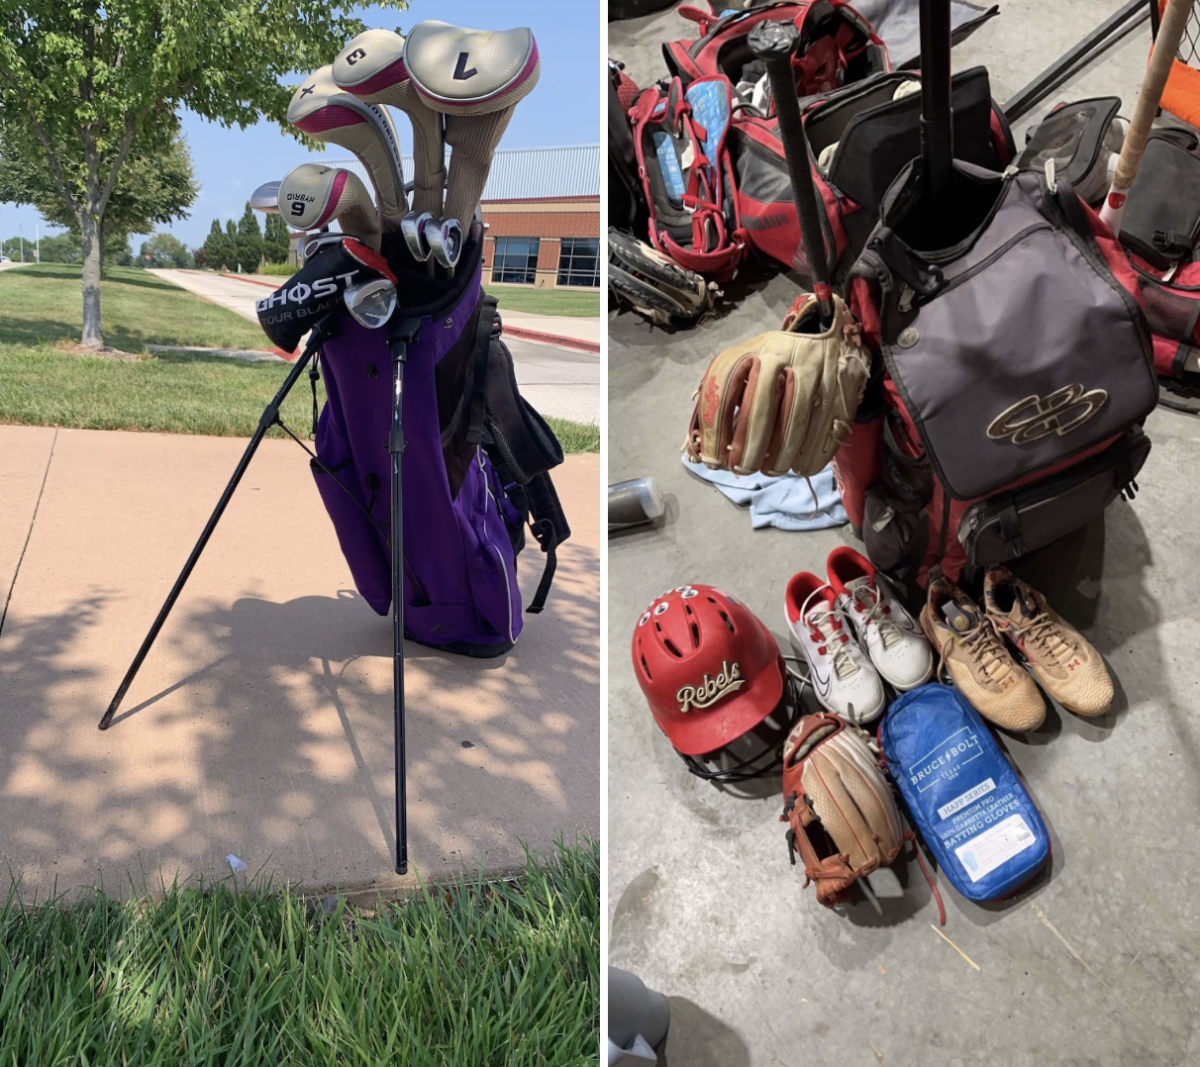 All the supplies needed for golf. The bags are provided by the schools. (Photo by K. Stabb)  
Olivia Fraleys softball bag she uses for practices and games. There is nothing provided by the school.
